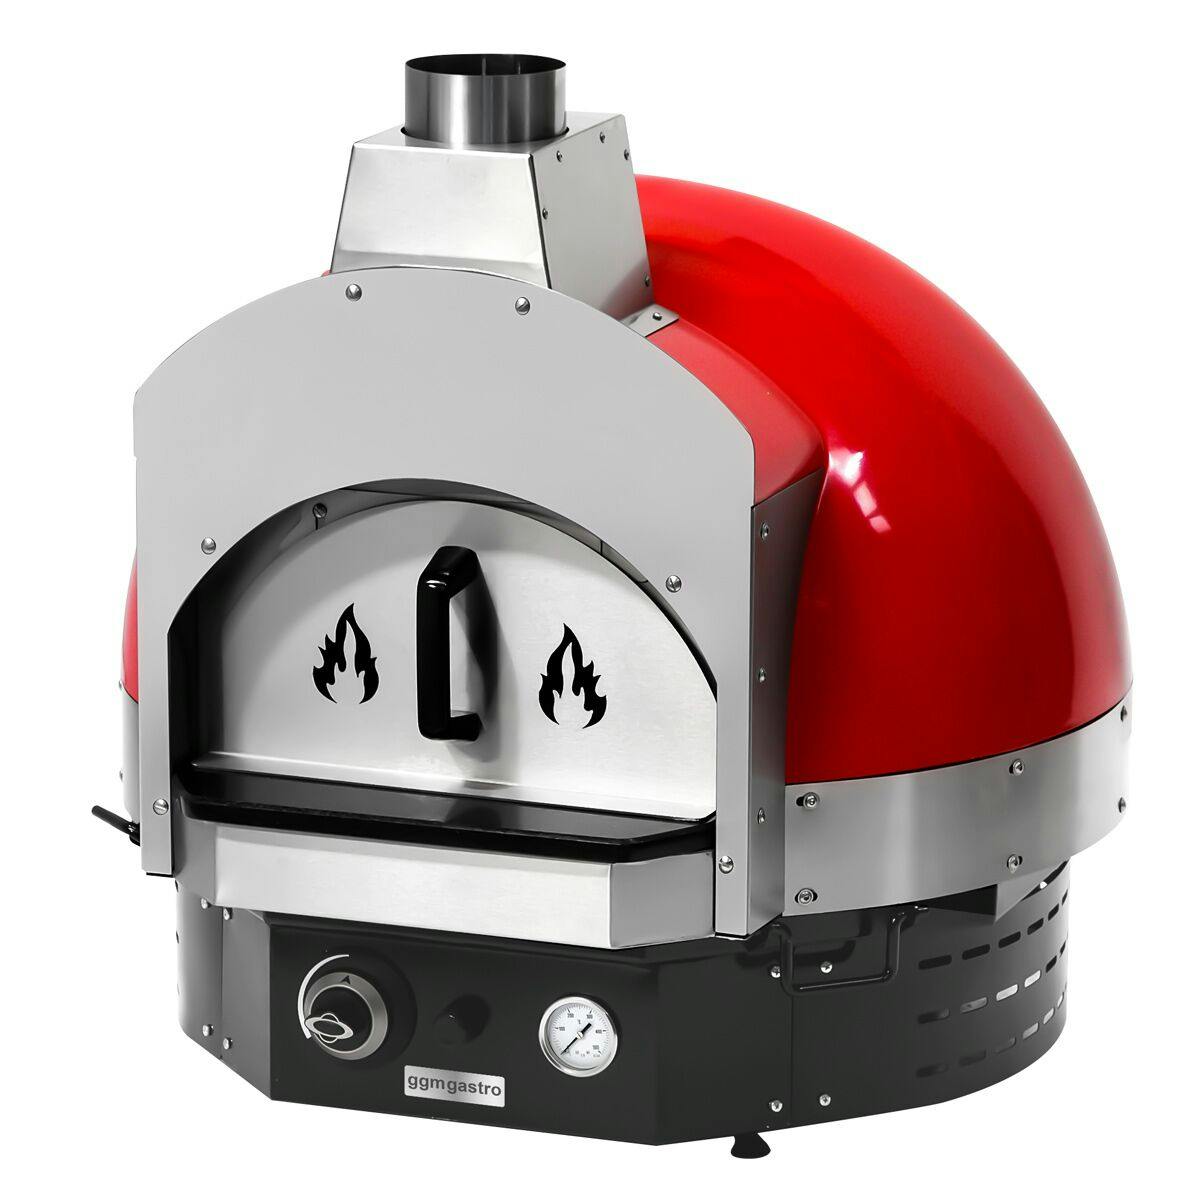 Gas pizza oven red - incl. base - height: 0.77 m	